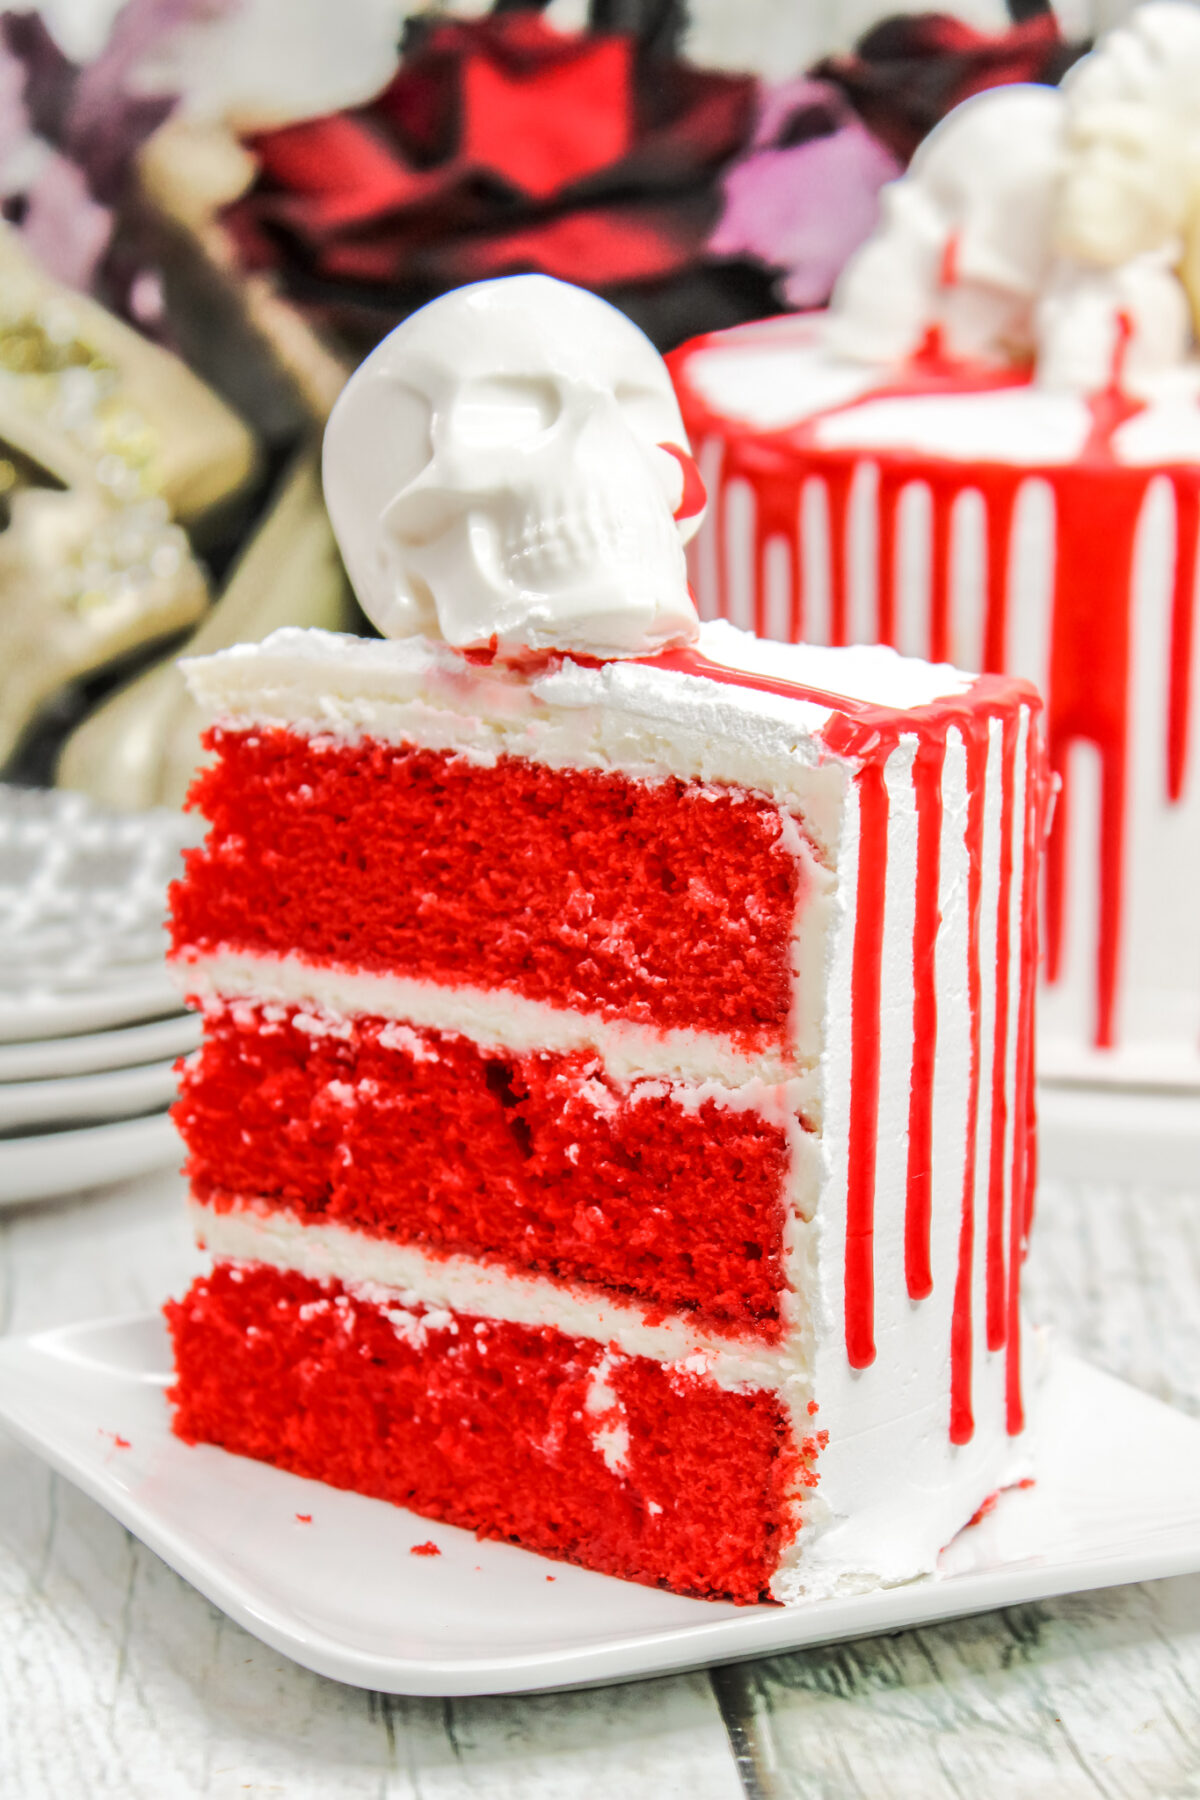 This bloody skull cake recipe is perfect for any Halloween party; pair it with some great looking gory decorations to really set the tone!